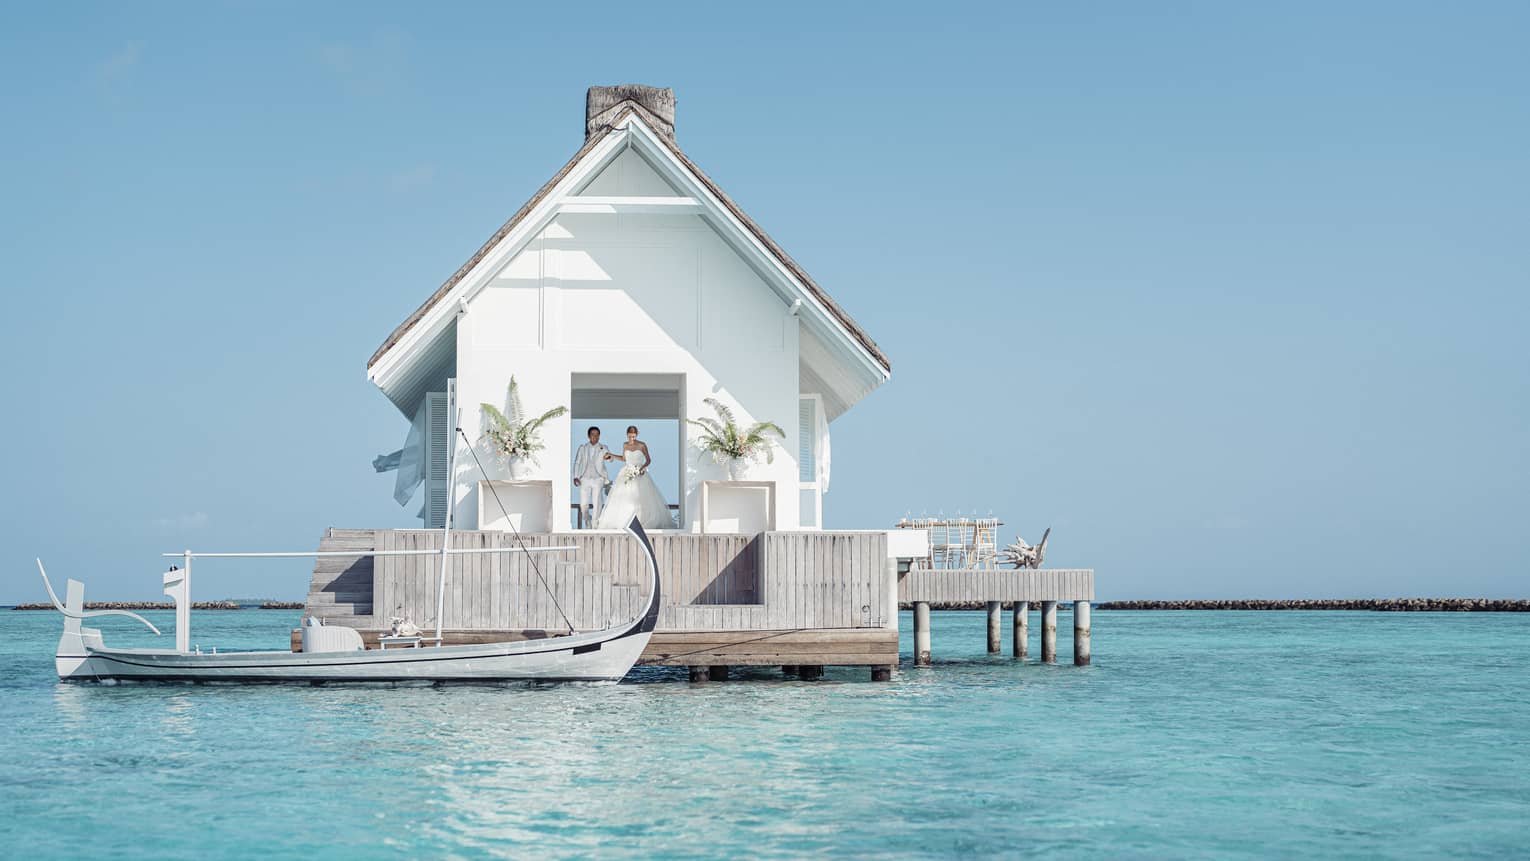 Bride and groom emerge from their overwater wedding pavilion